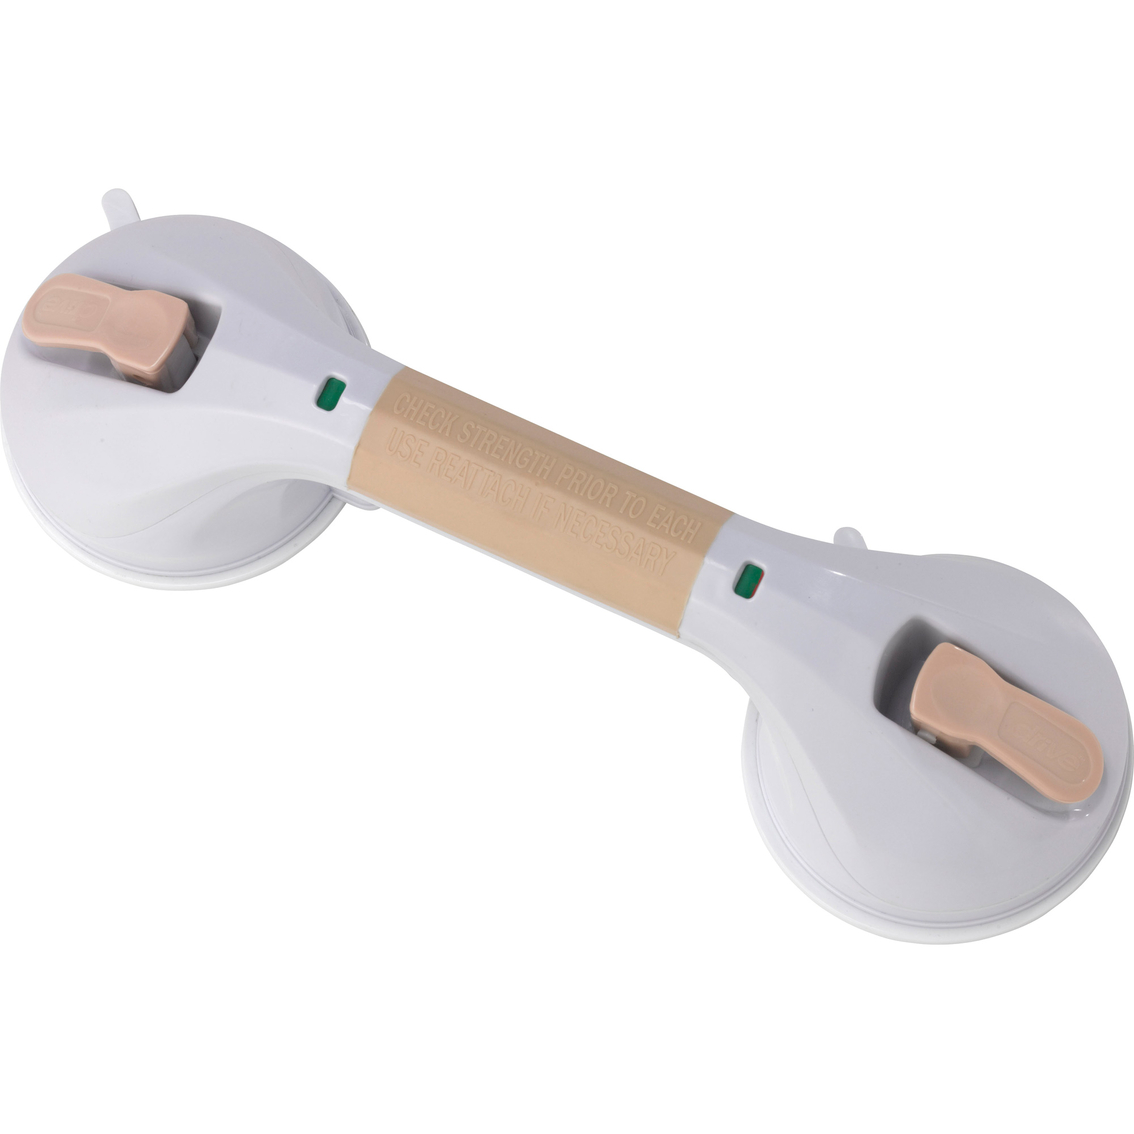 Drive Medical Suction Cup Grab Bar 12 in., Beige - Image 2 of 4